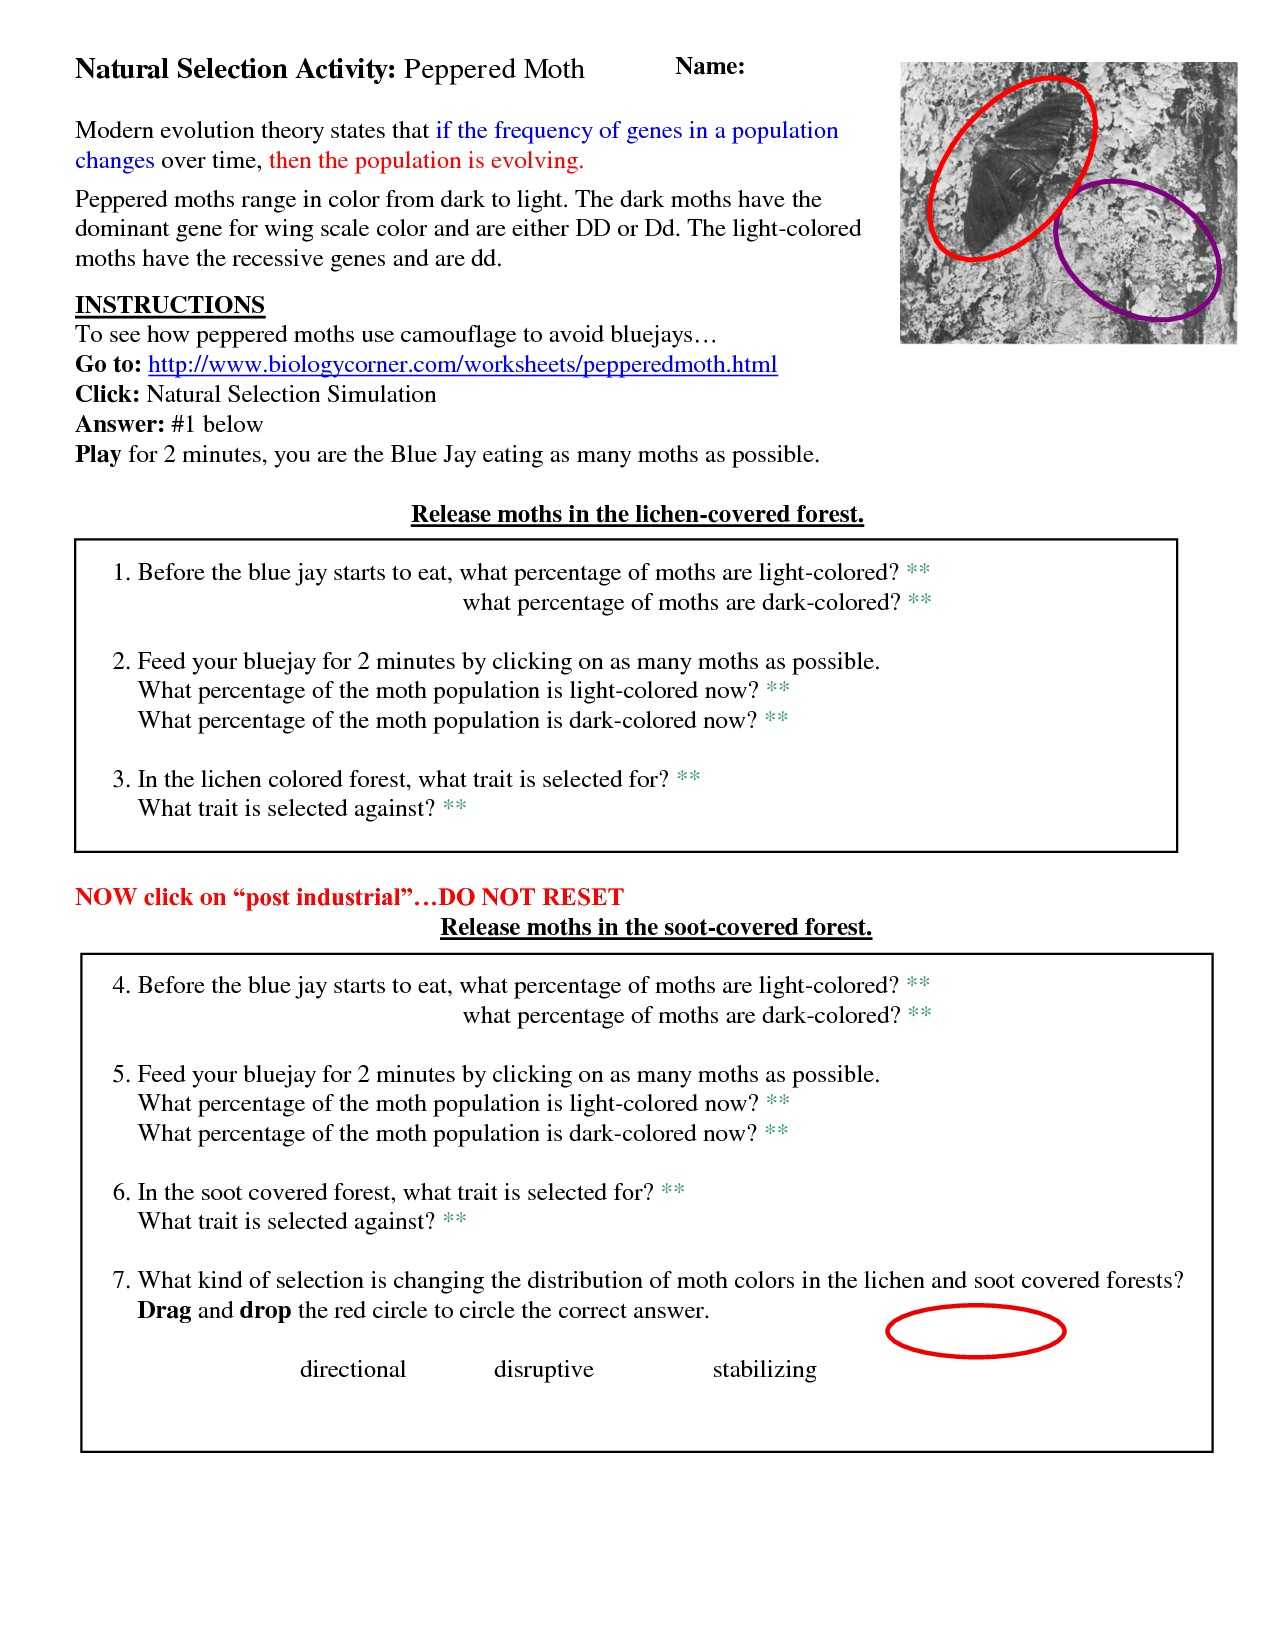 Evolution by Natural Selection Worksheet or Peppered Moth Simulation Worksheet Answers Image Collections